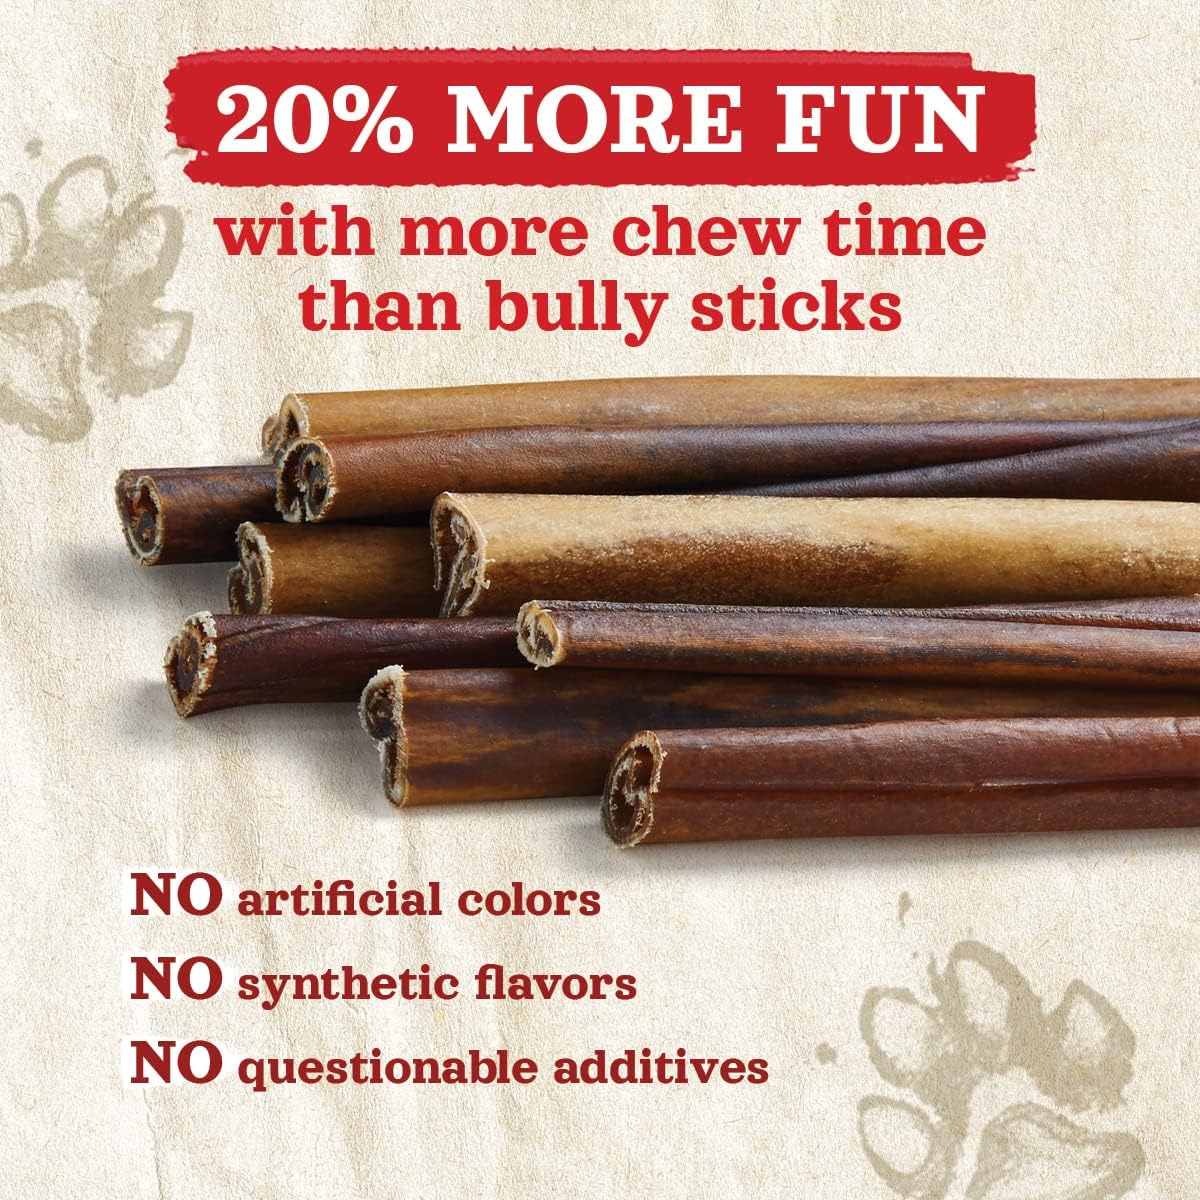 Natural Farm Collagen Sticks 6-Inch Dog Chews - Odor-Free, 95% Natural Collagen Supports Healthy Joints, Skin & Coat - Small, Medium Dogs – Lasts 20% More (6 inch, 5 Pack) : Pet Supplies